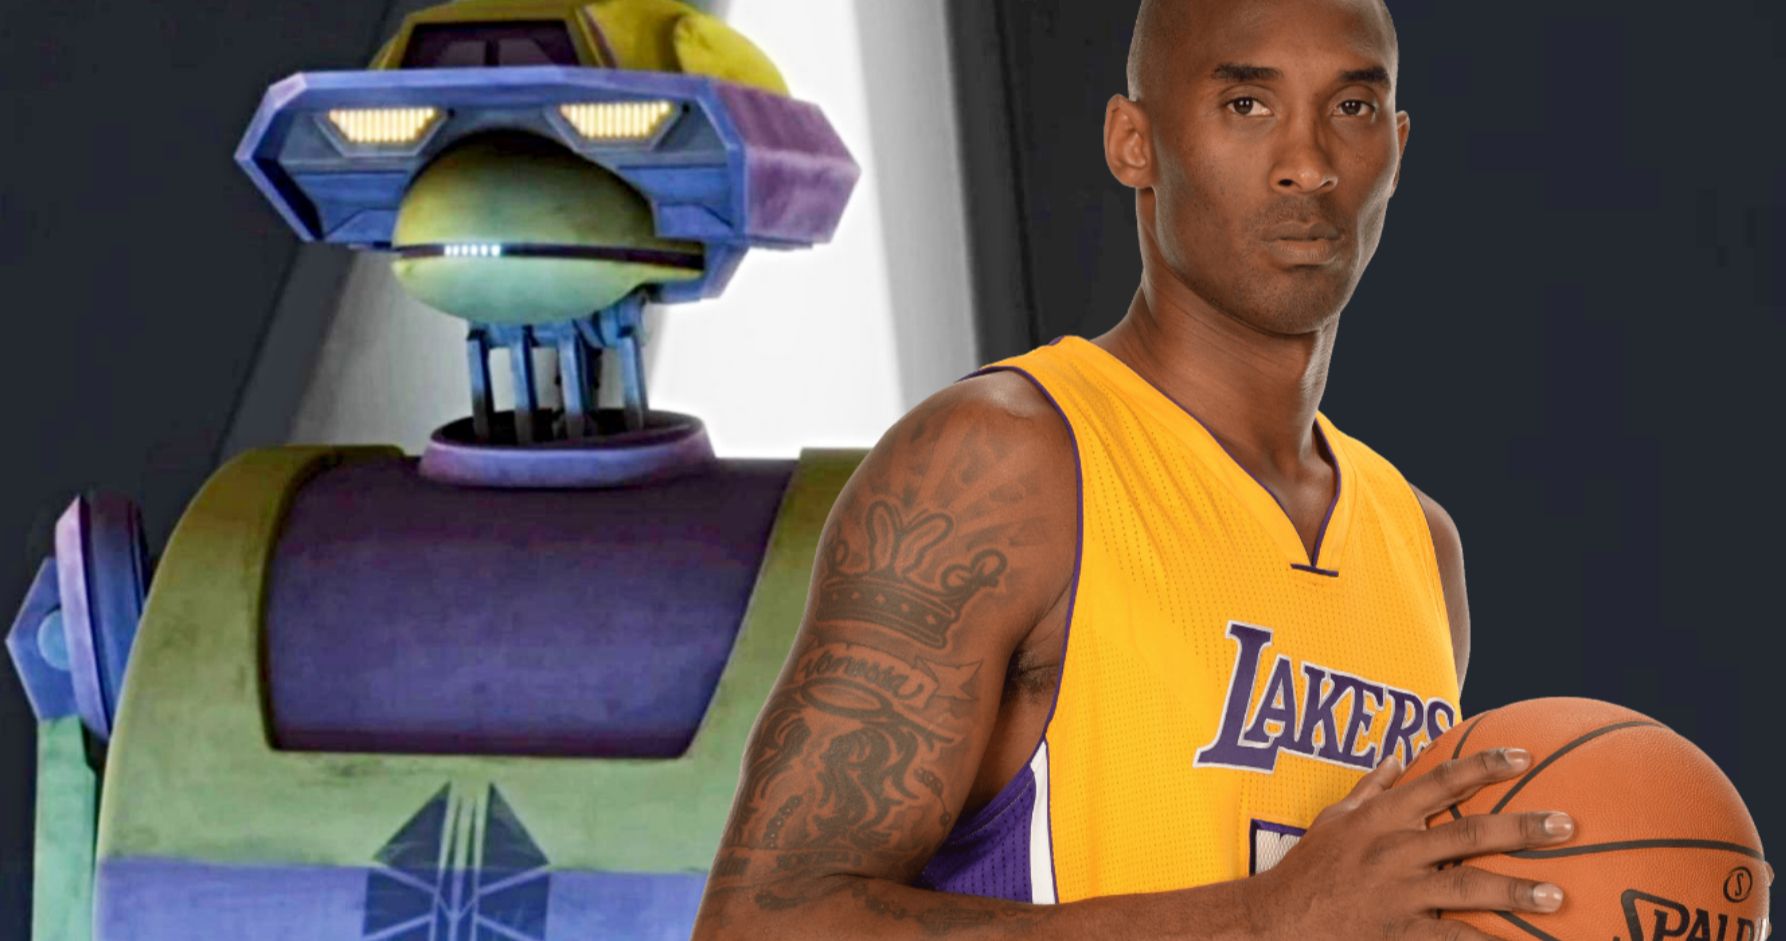 Kobe Bryant Inspired This Star Wars Droid in The Clone Wars